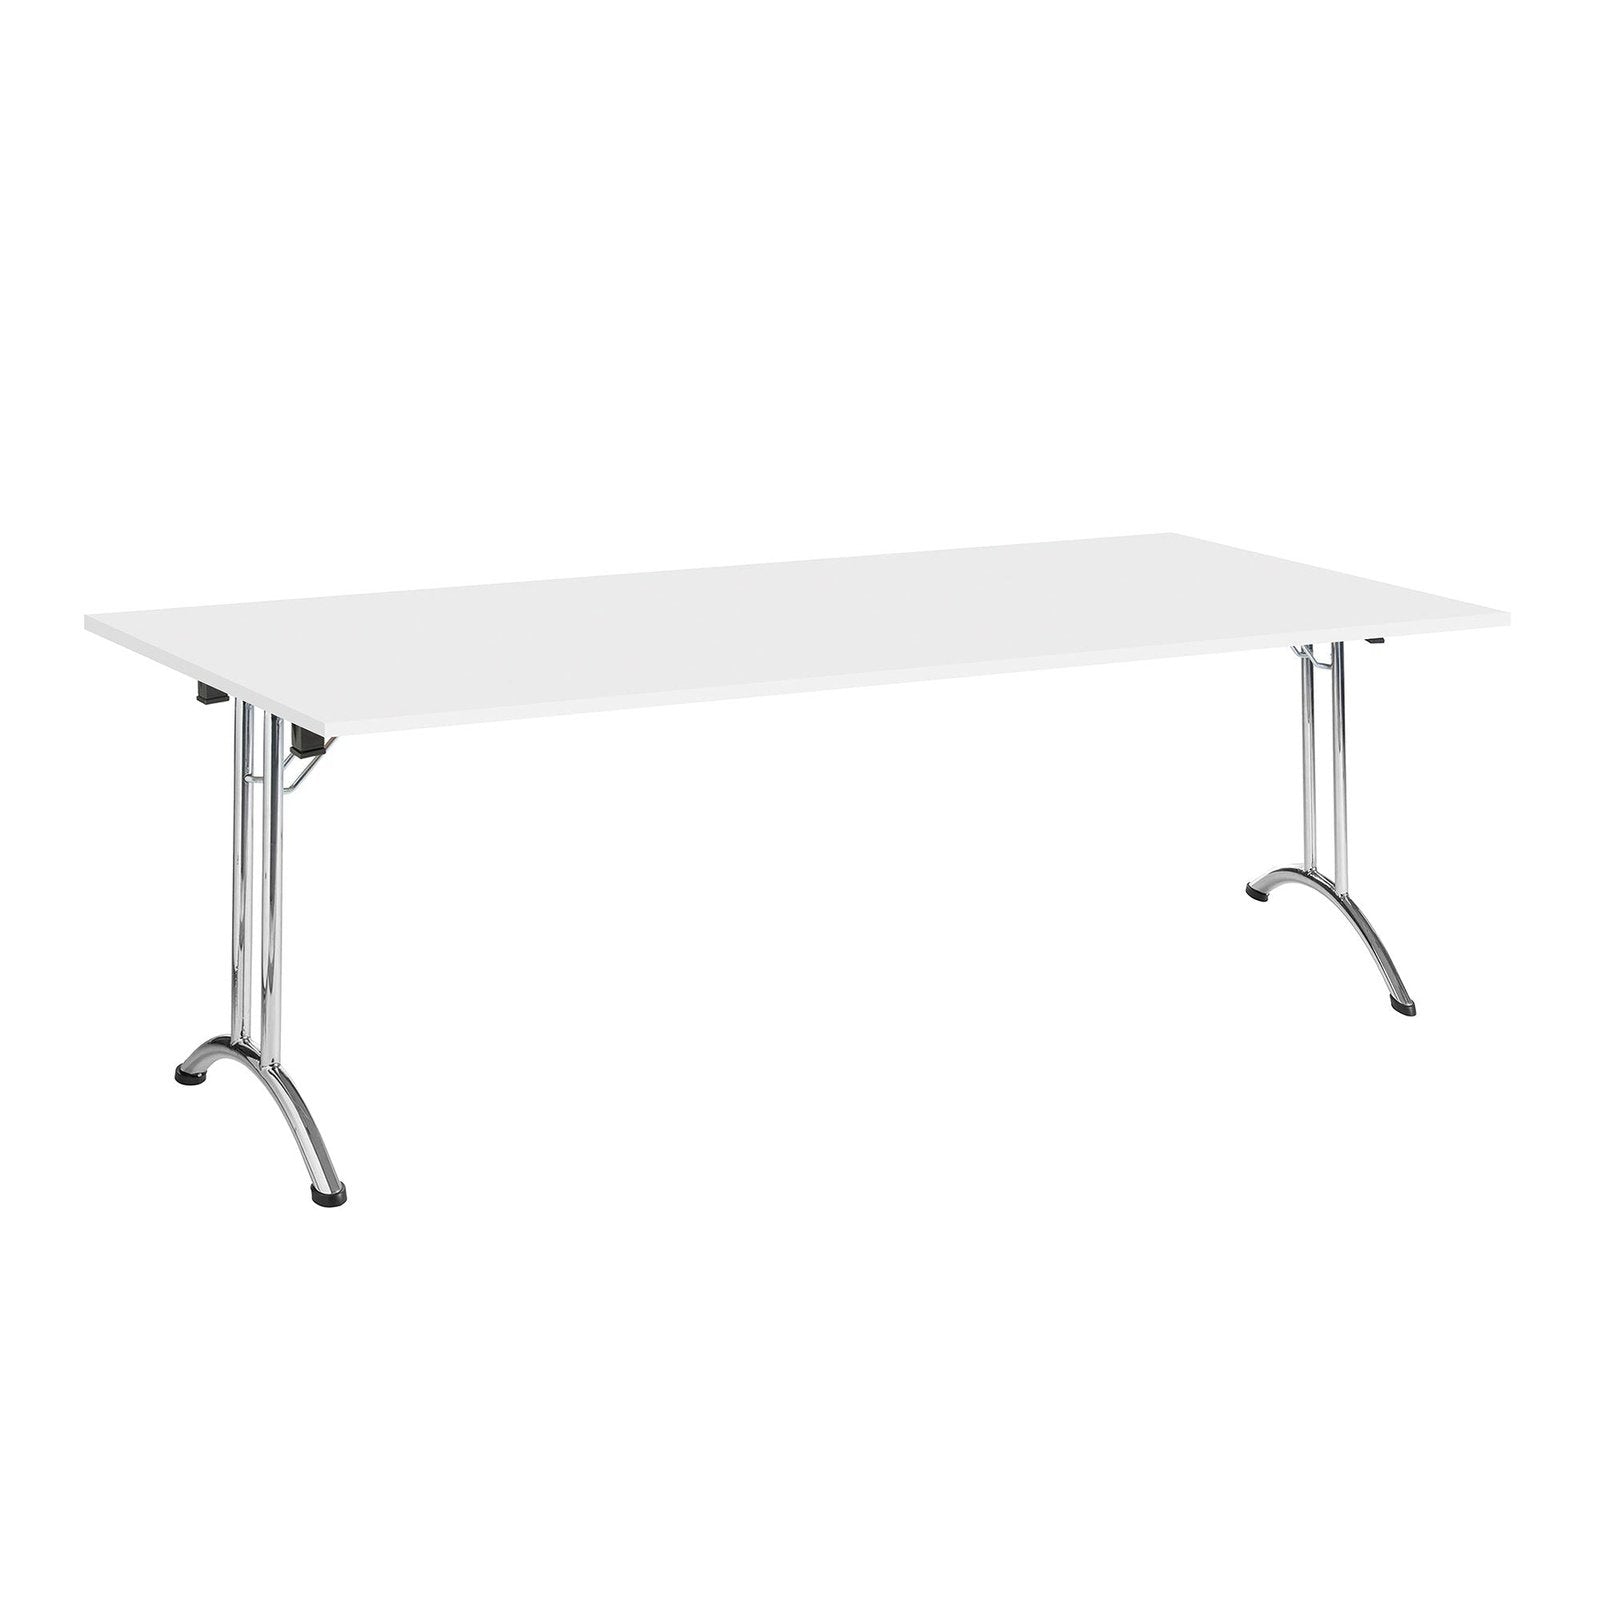 Folding Rectangular Table - 1600x800mm - Office Products Online